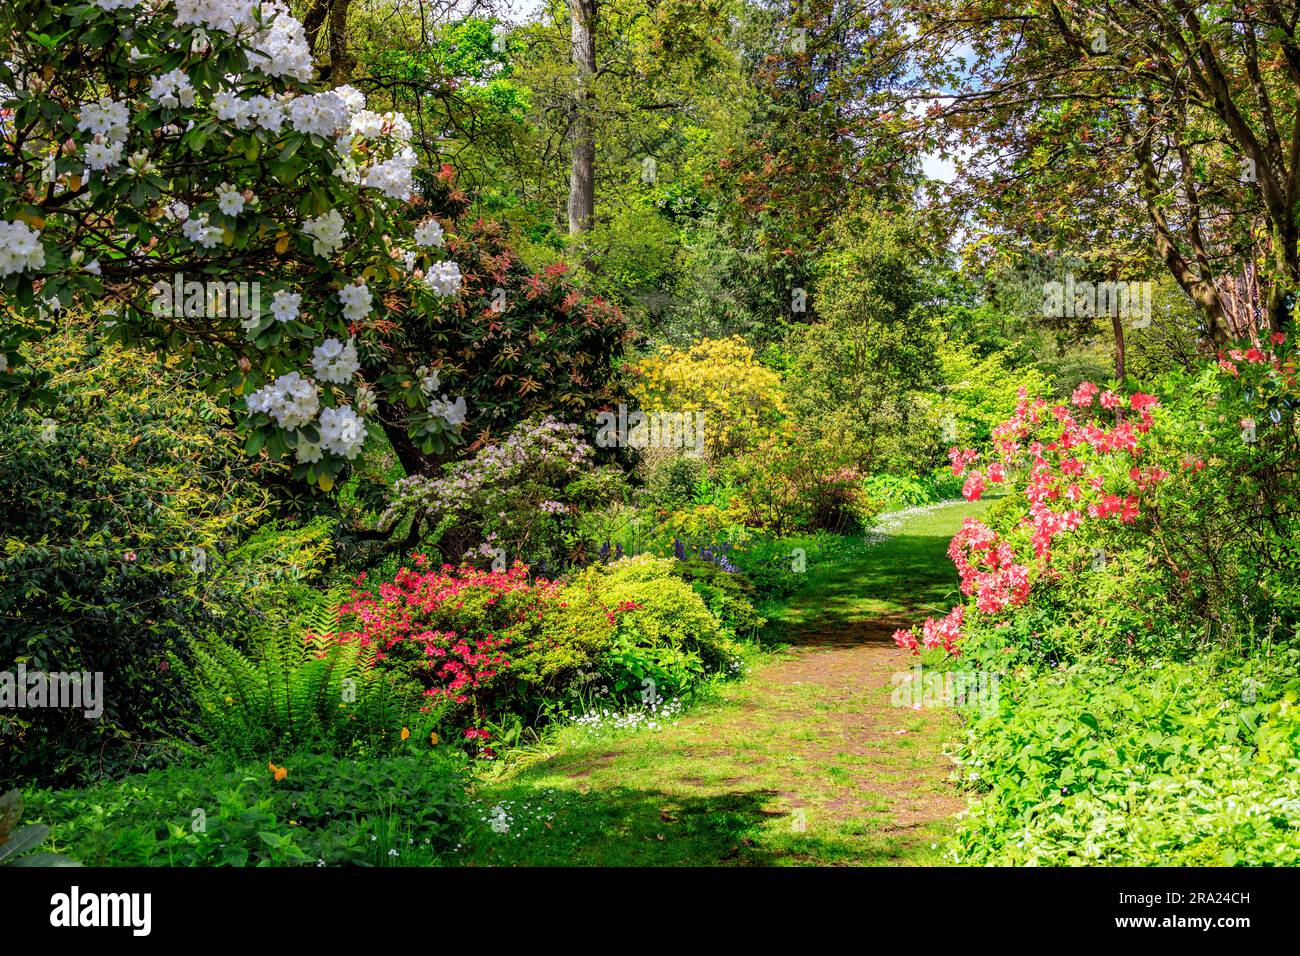 Colourful flowers of azaleas and rhododendrons in the woodlands at Knightshayes Court, nr Tiverton, Devon, England, UK Stock Photo